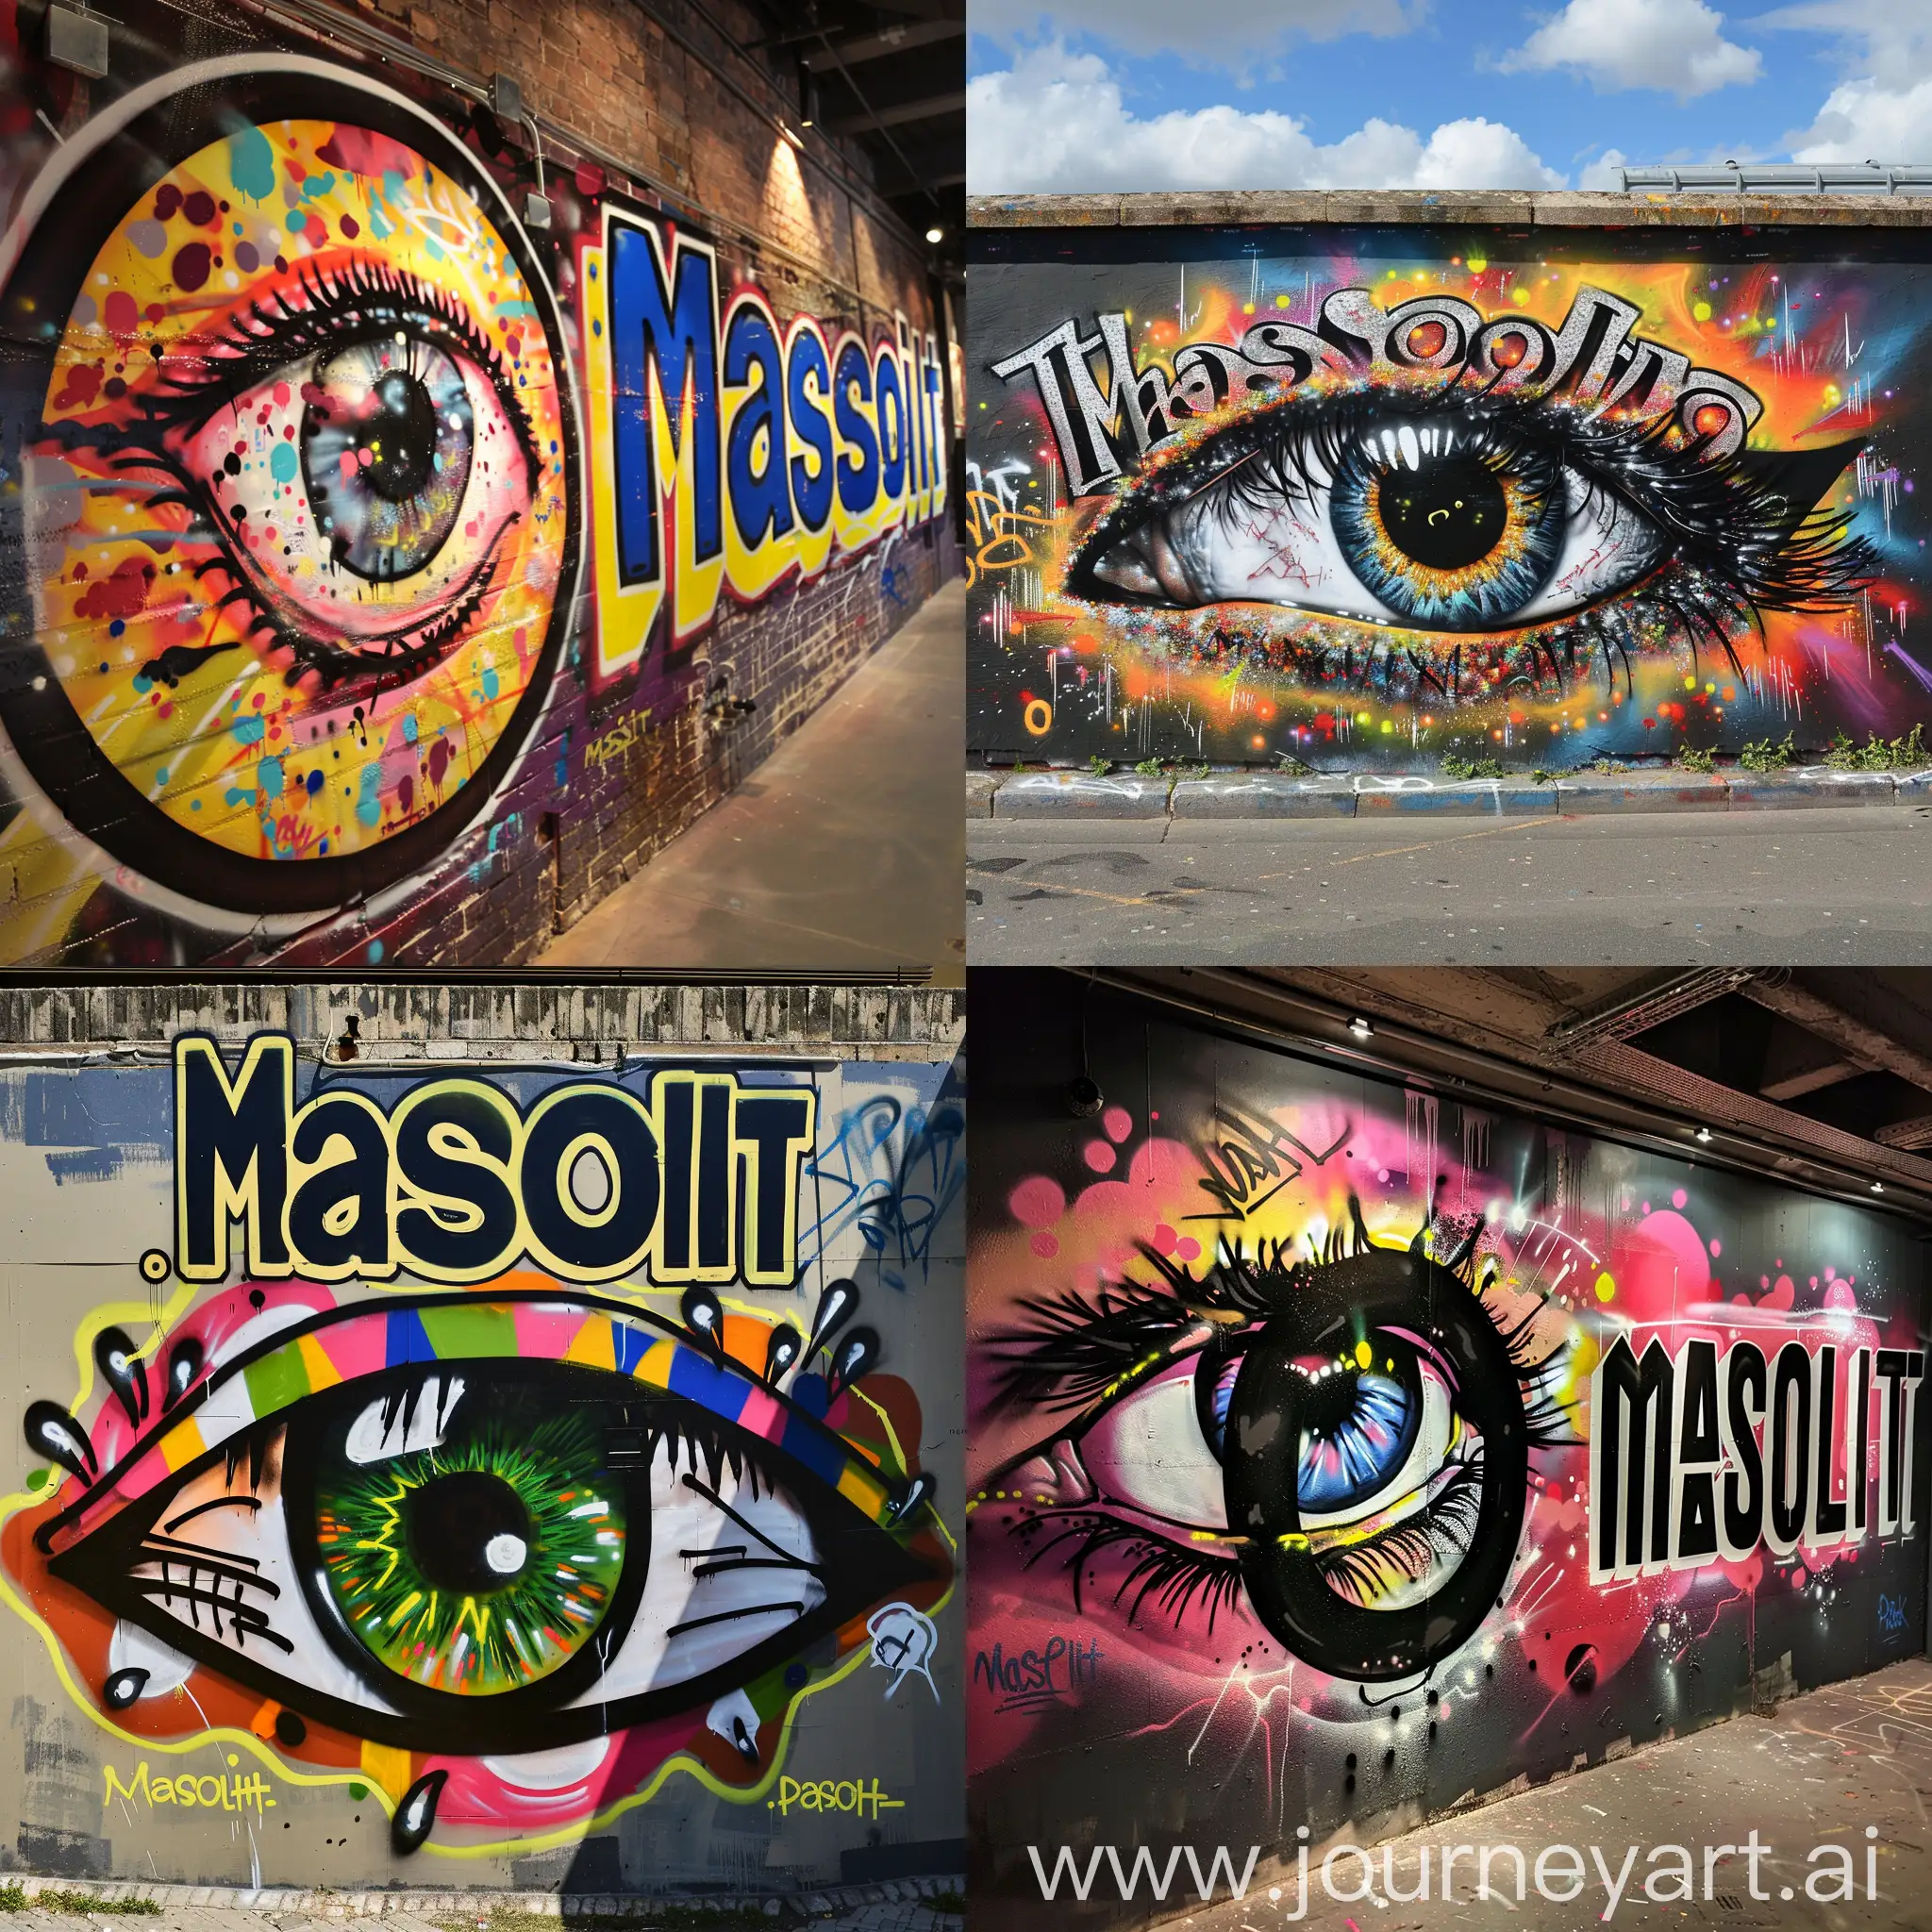 It says MassOlit on the wall, but the letter O is shaped like an eye. Make the rest as eccentric as you wish, graffiti